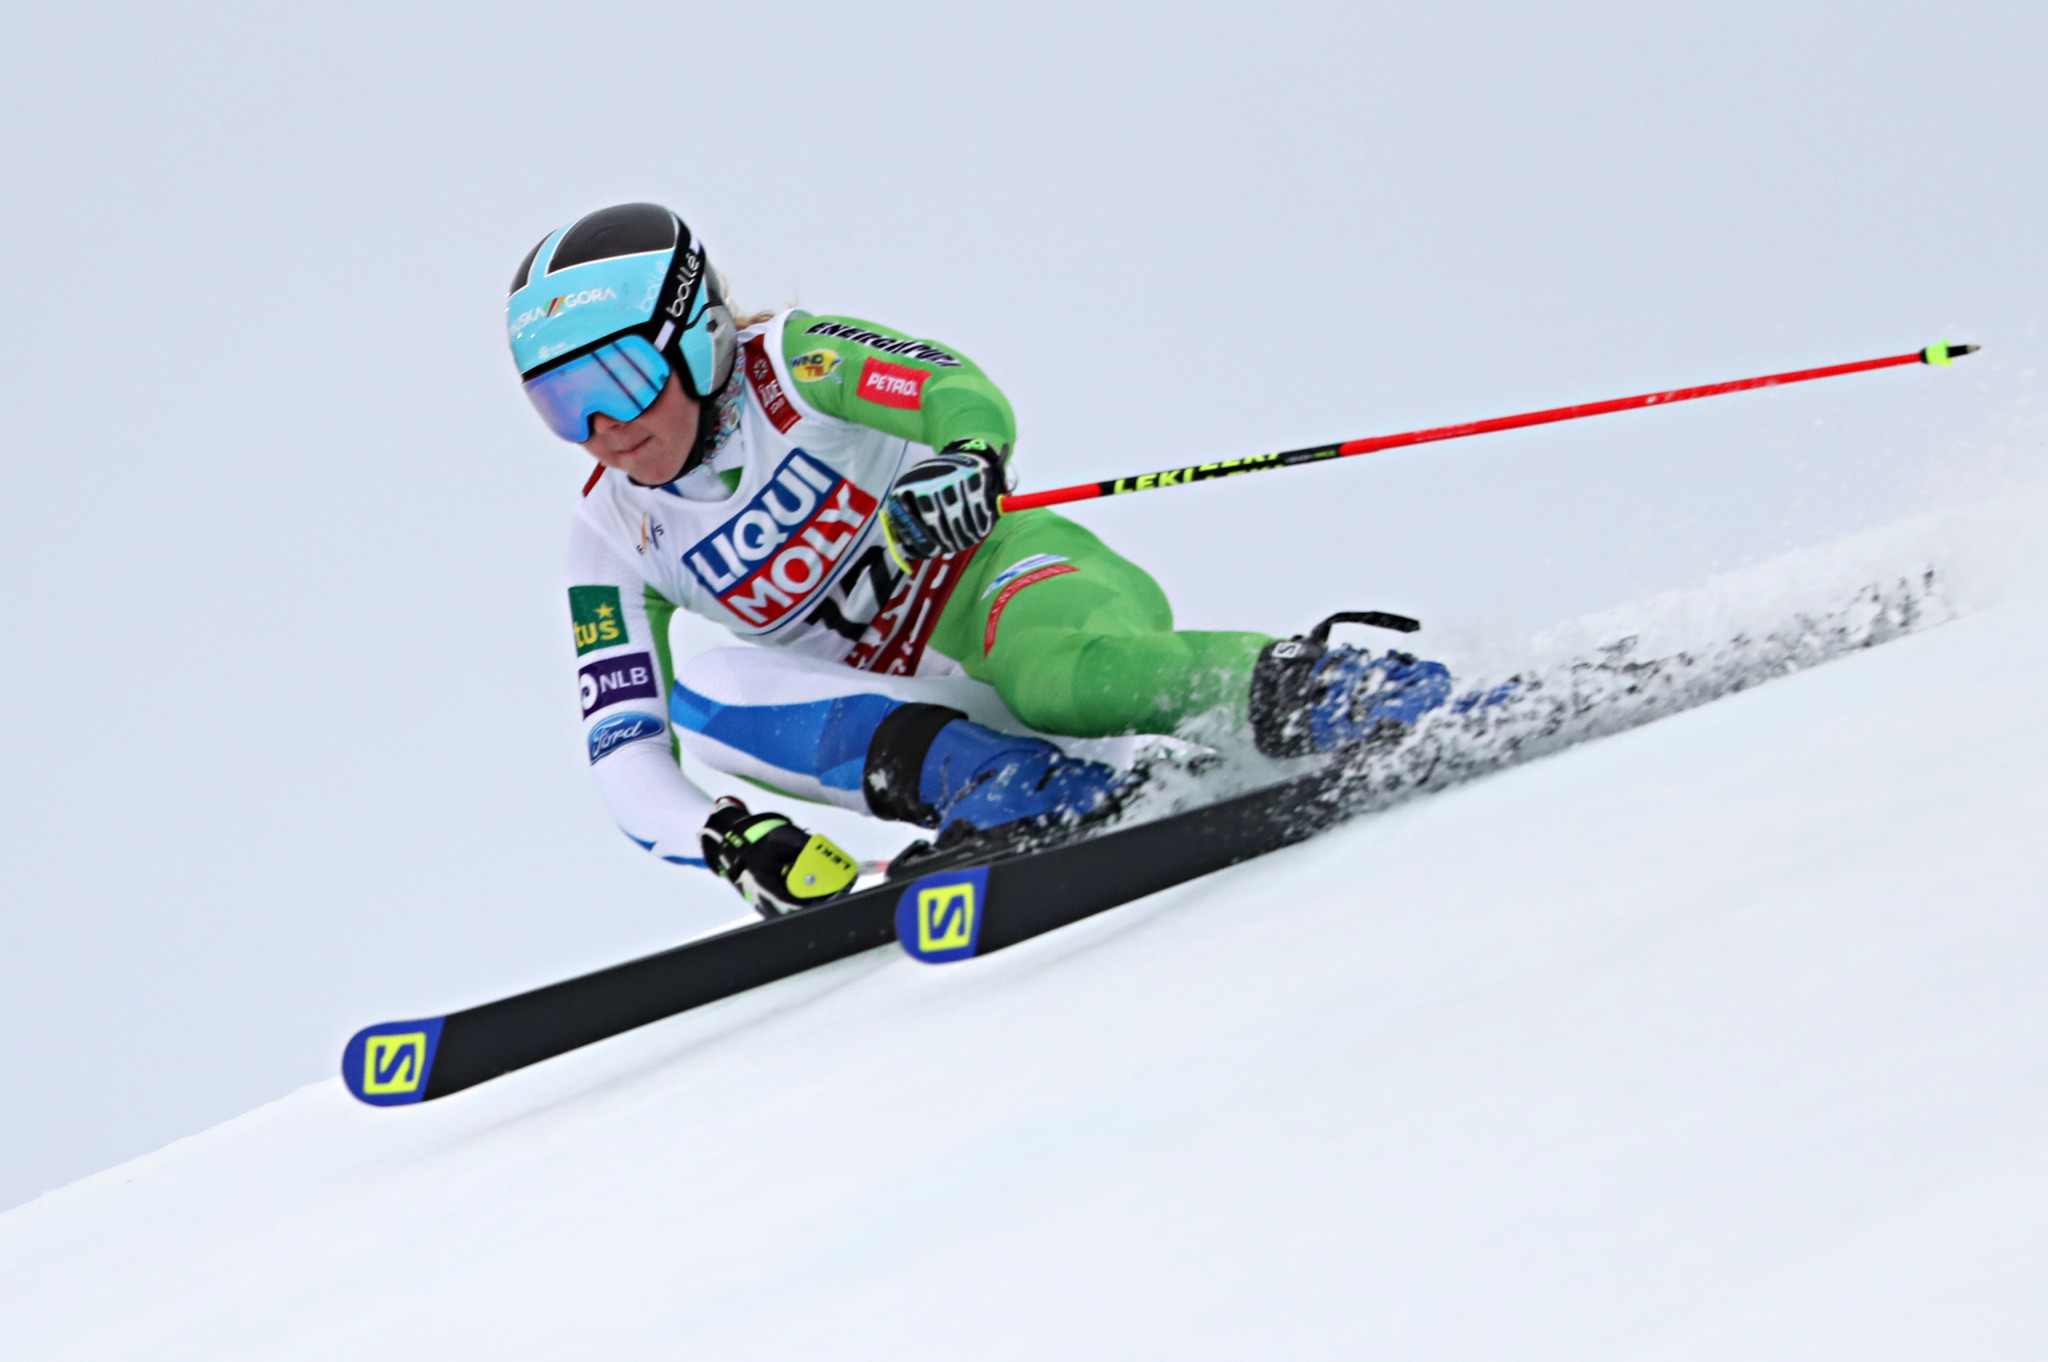 Slovenia's Meta Hrovat defended her title in the women's slalom at the World Junior Alpine Skiing Championships ©Getty Images